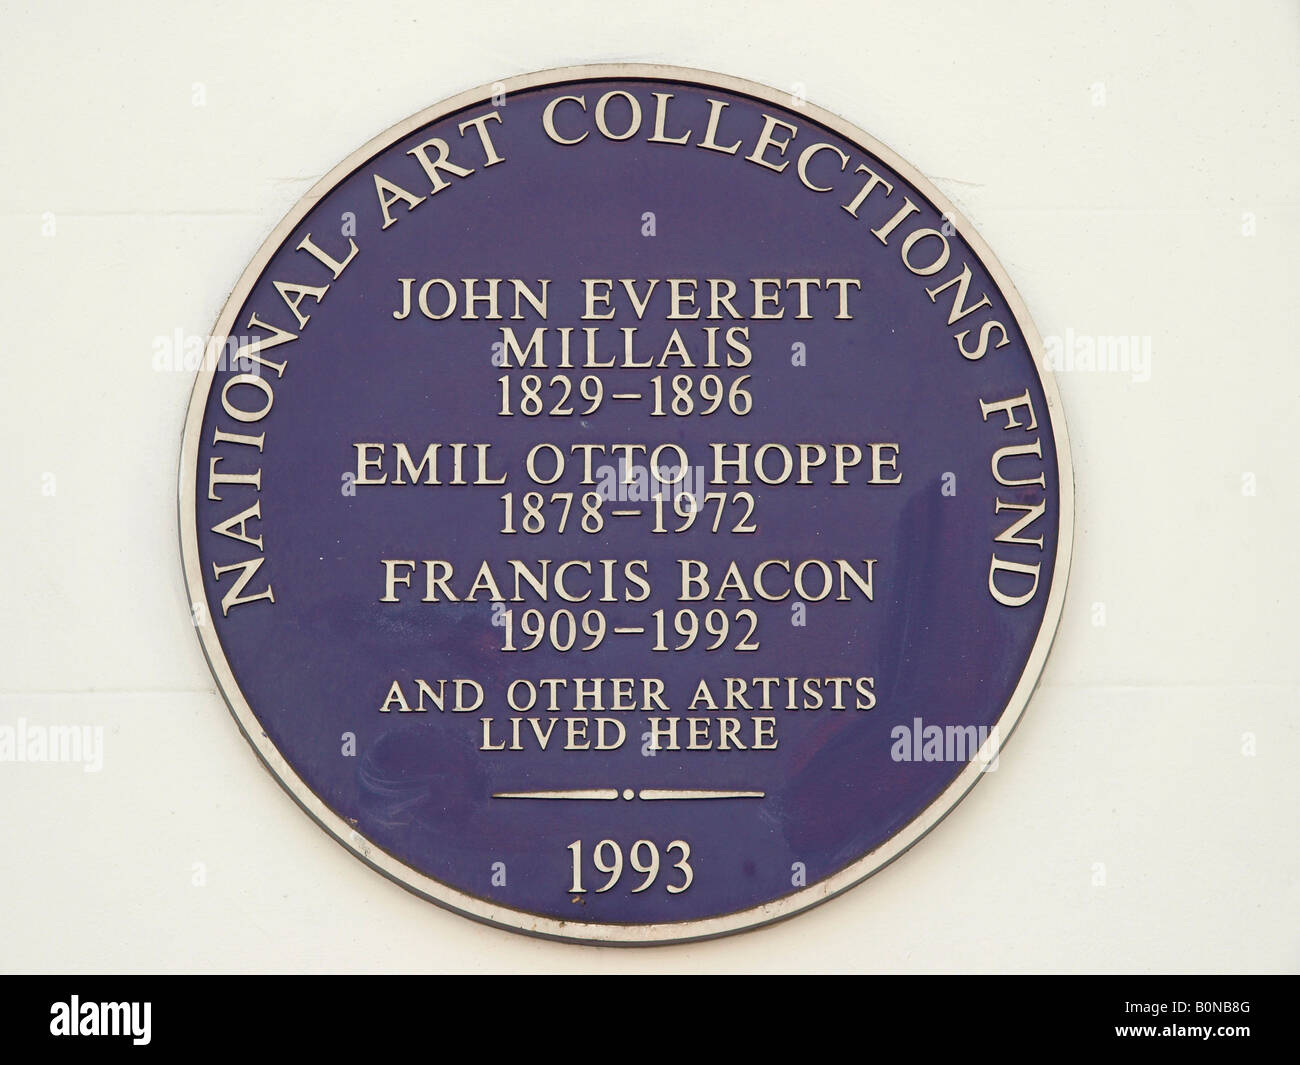 Plaque at 7 Cromwell Place London listing resident artists Emil Otto Hoppe, John Everett Millais and Francis Bacon. Stock Photo